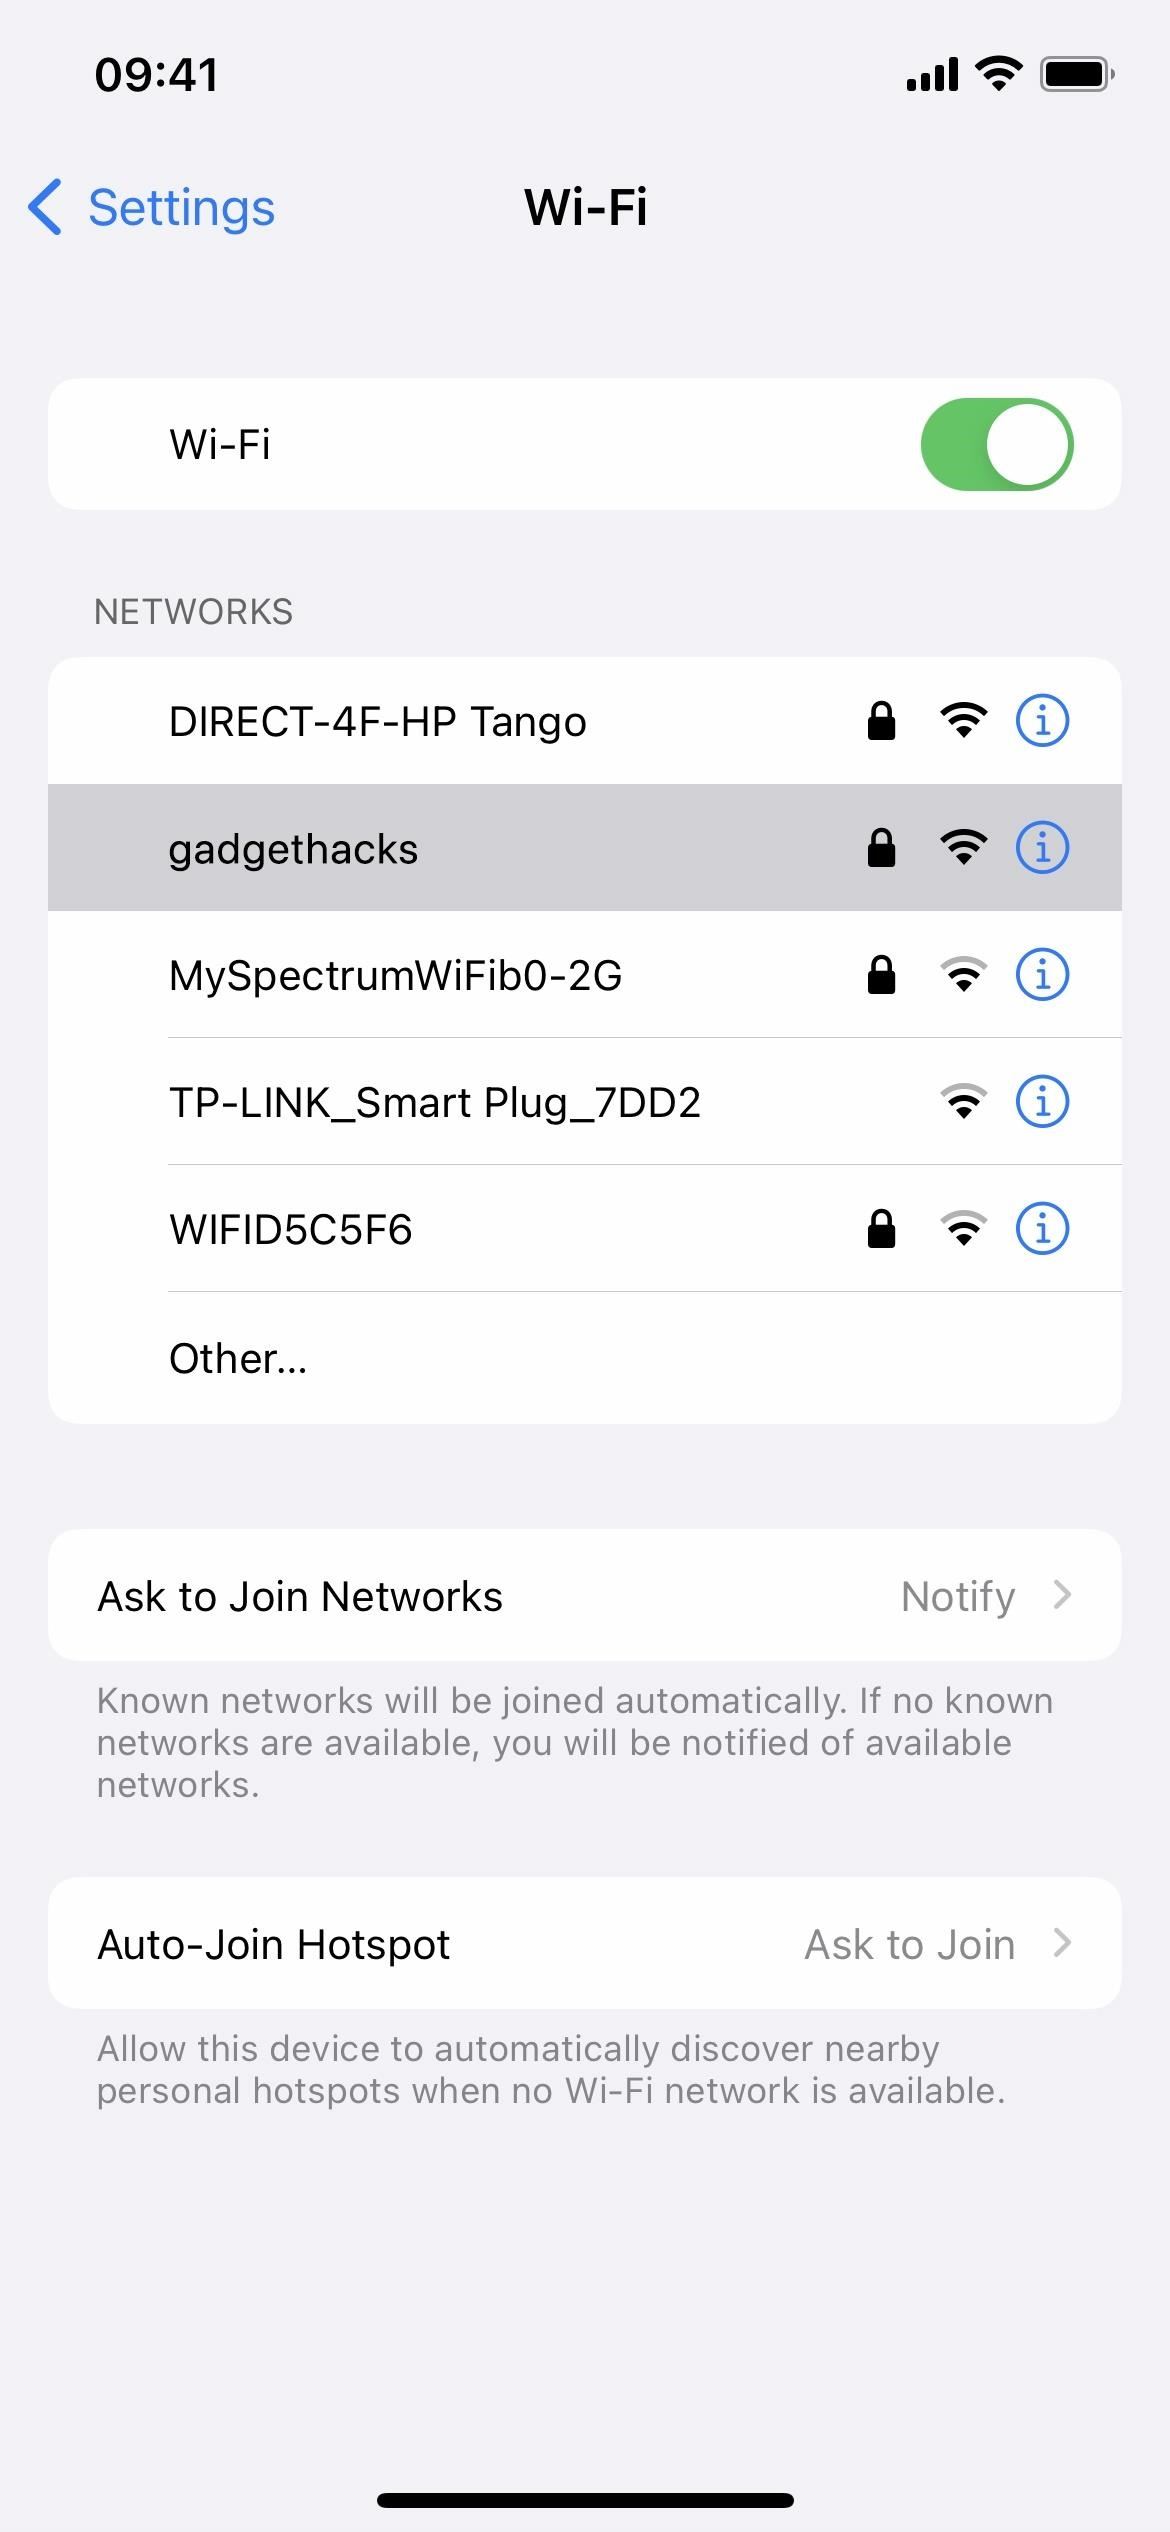 How to Instantly Share Wi-Fi Passwords from Your iPhone to Other Nearby Apple Devices